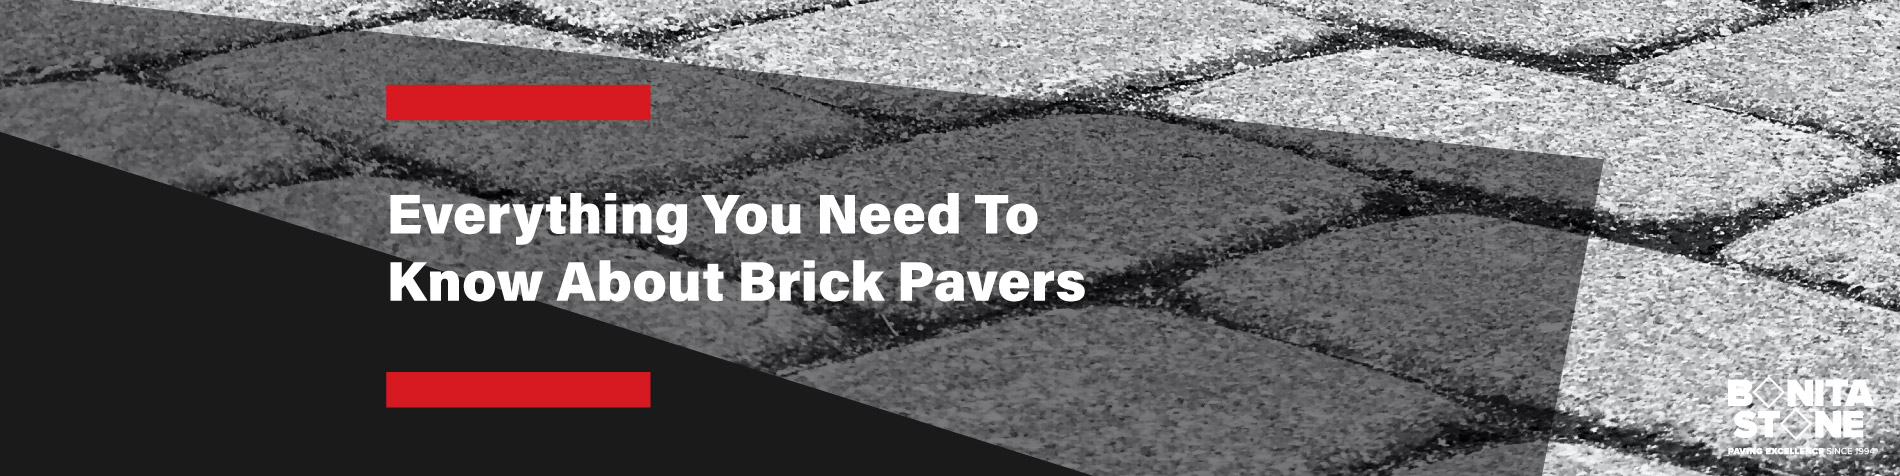 everything-you-need-to-know-about-brick-pavers-banner